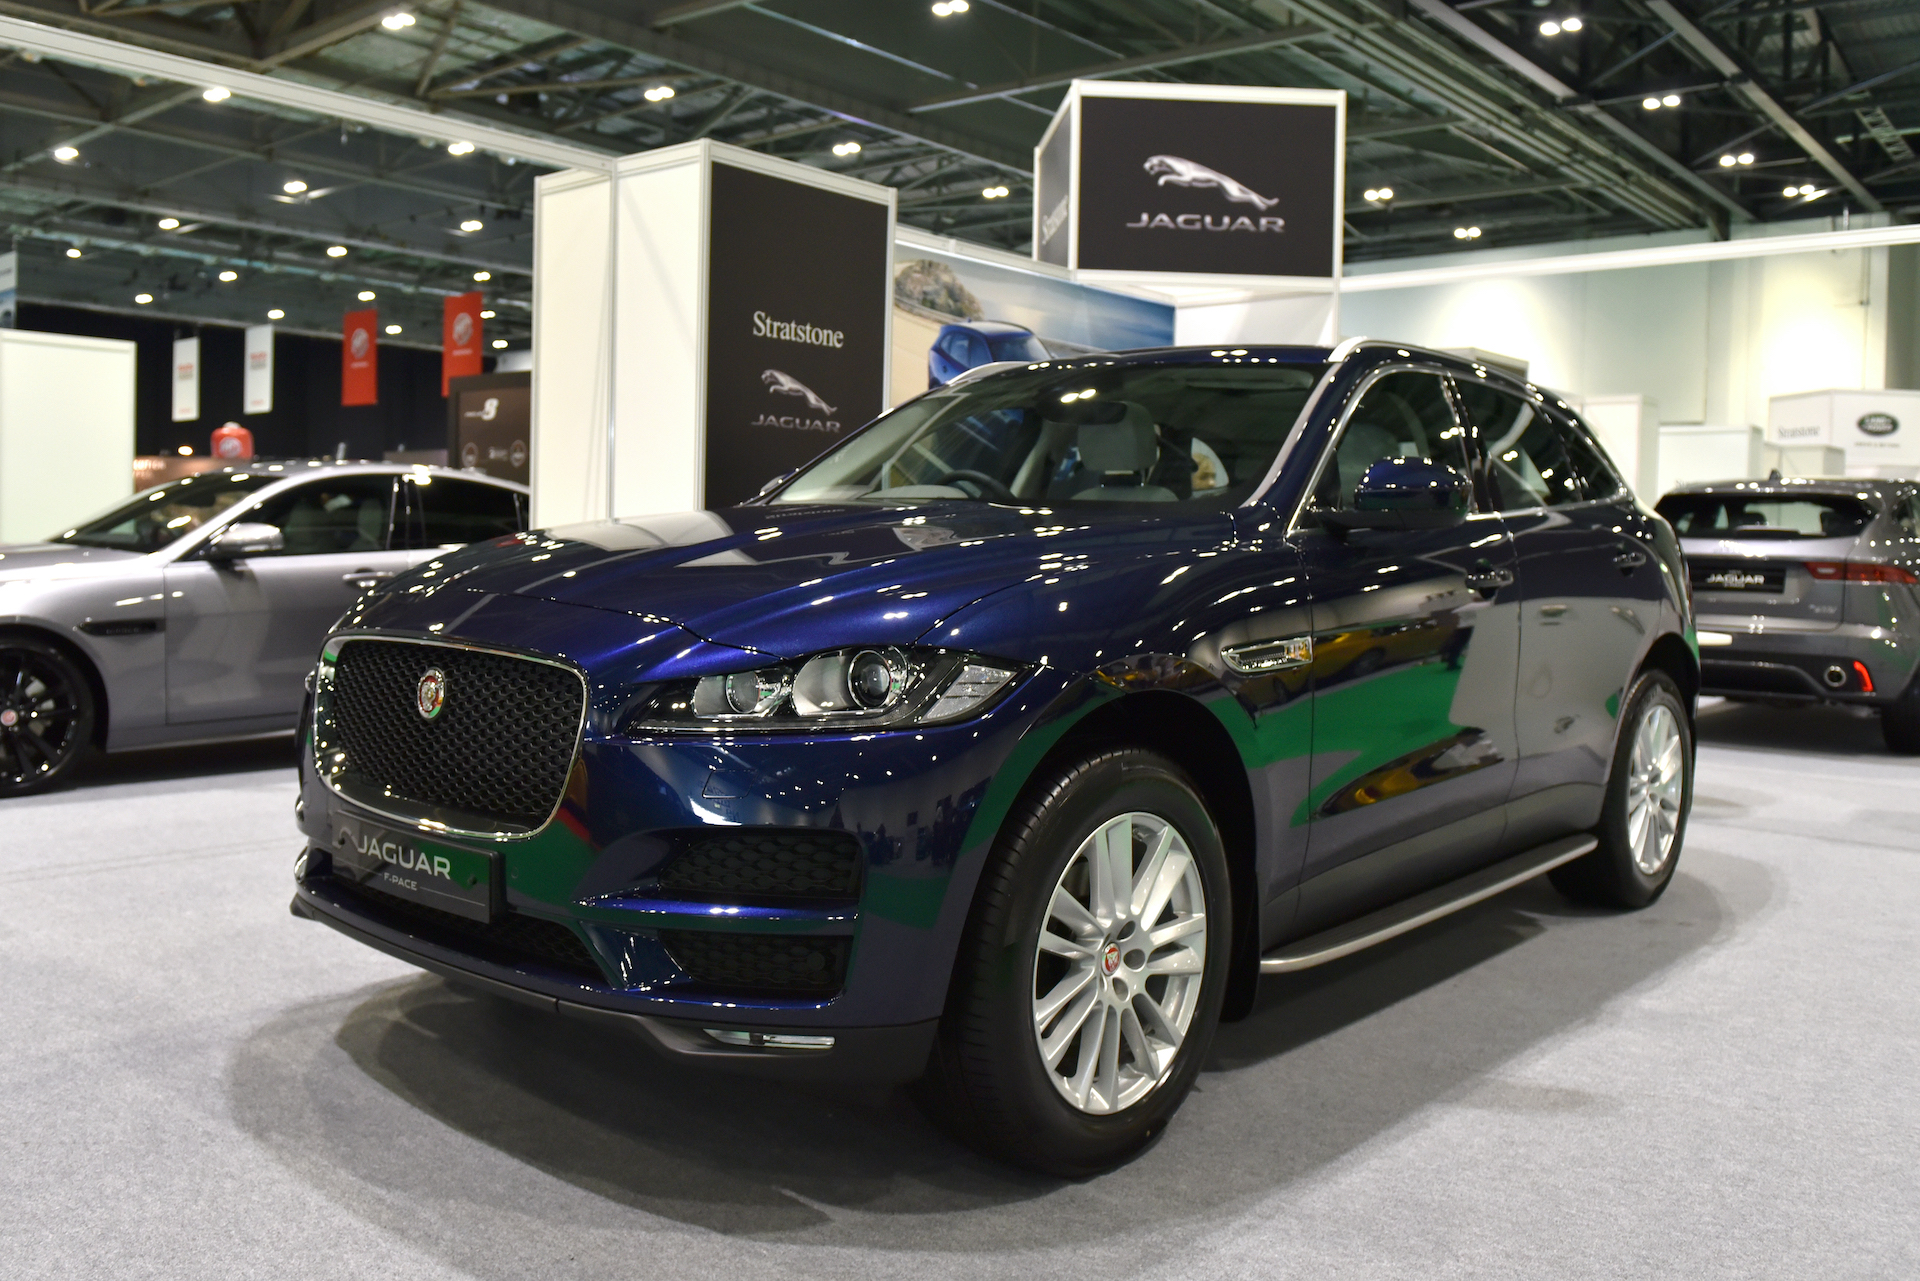 A Jaguar F-Pace SUV is displayed during the London Motor and Tech Show